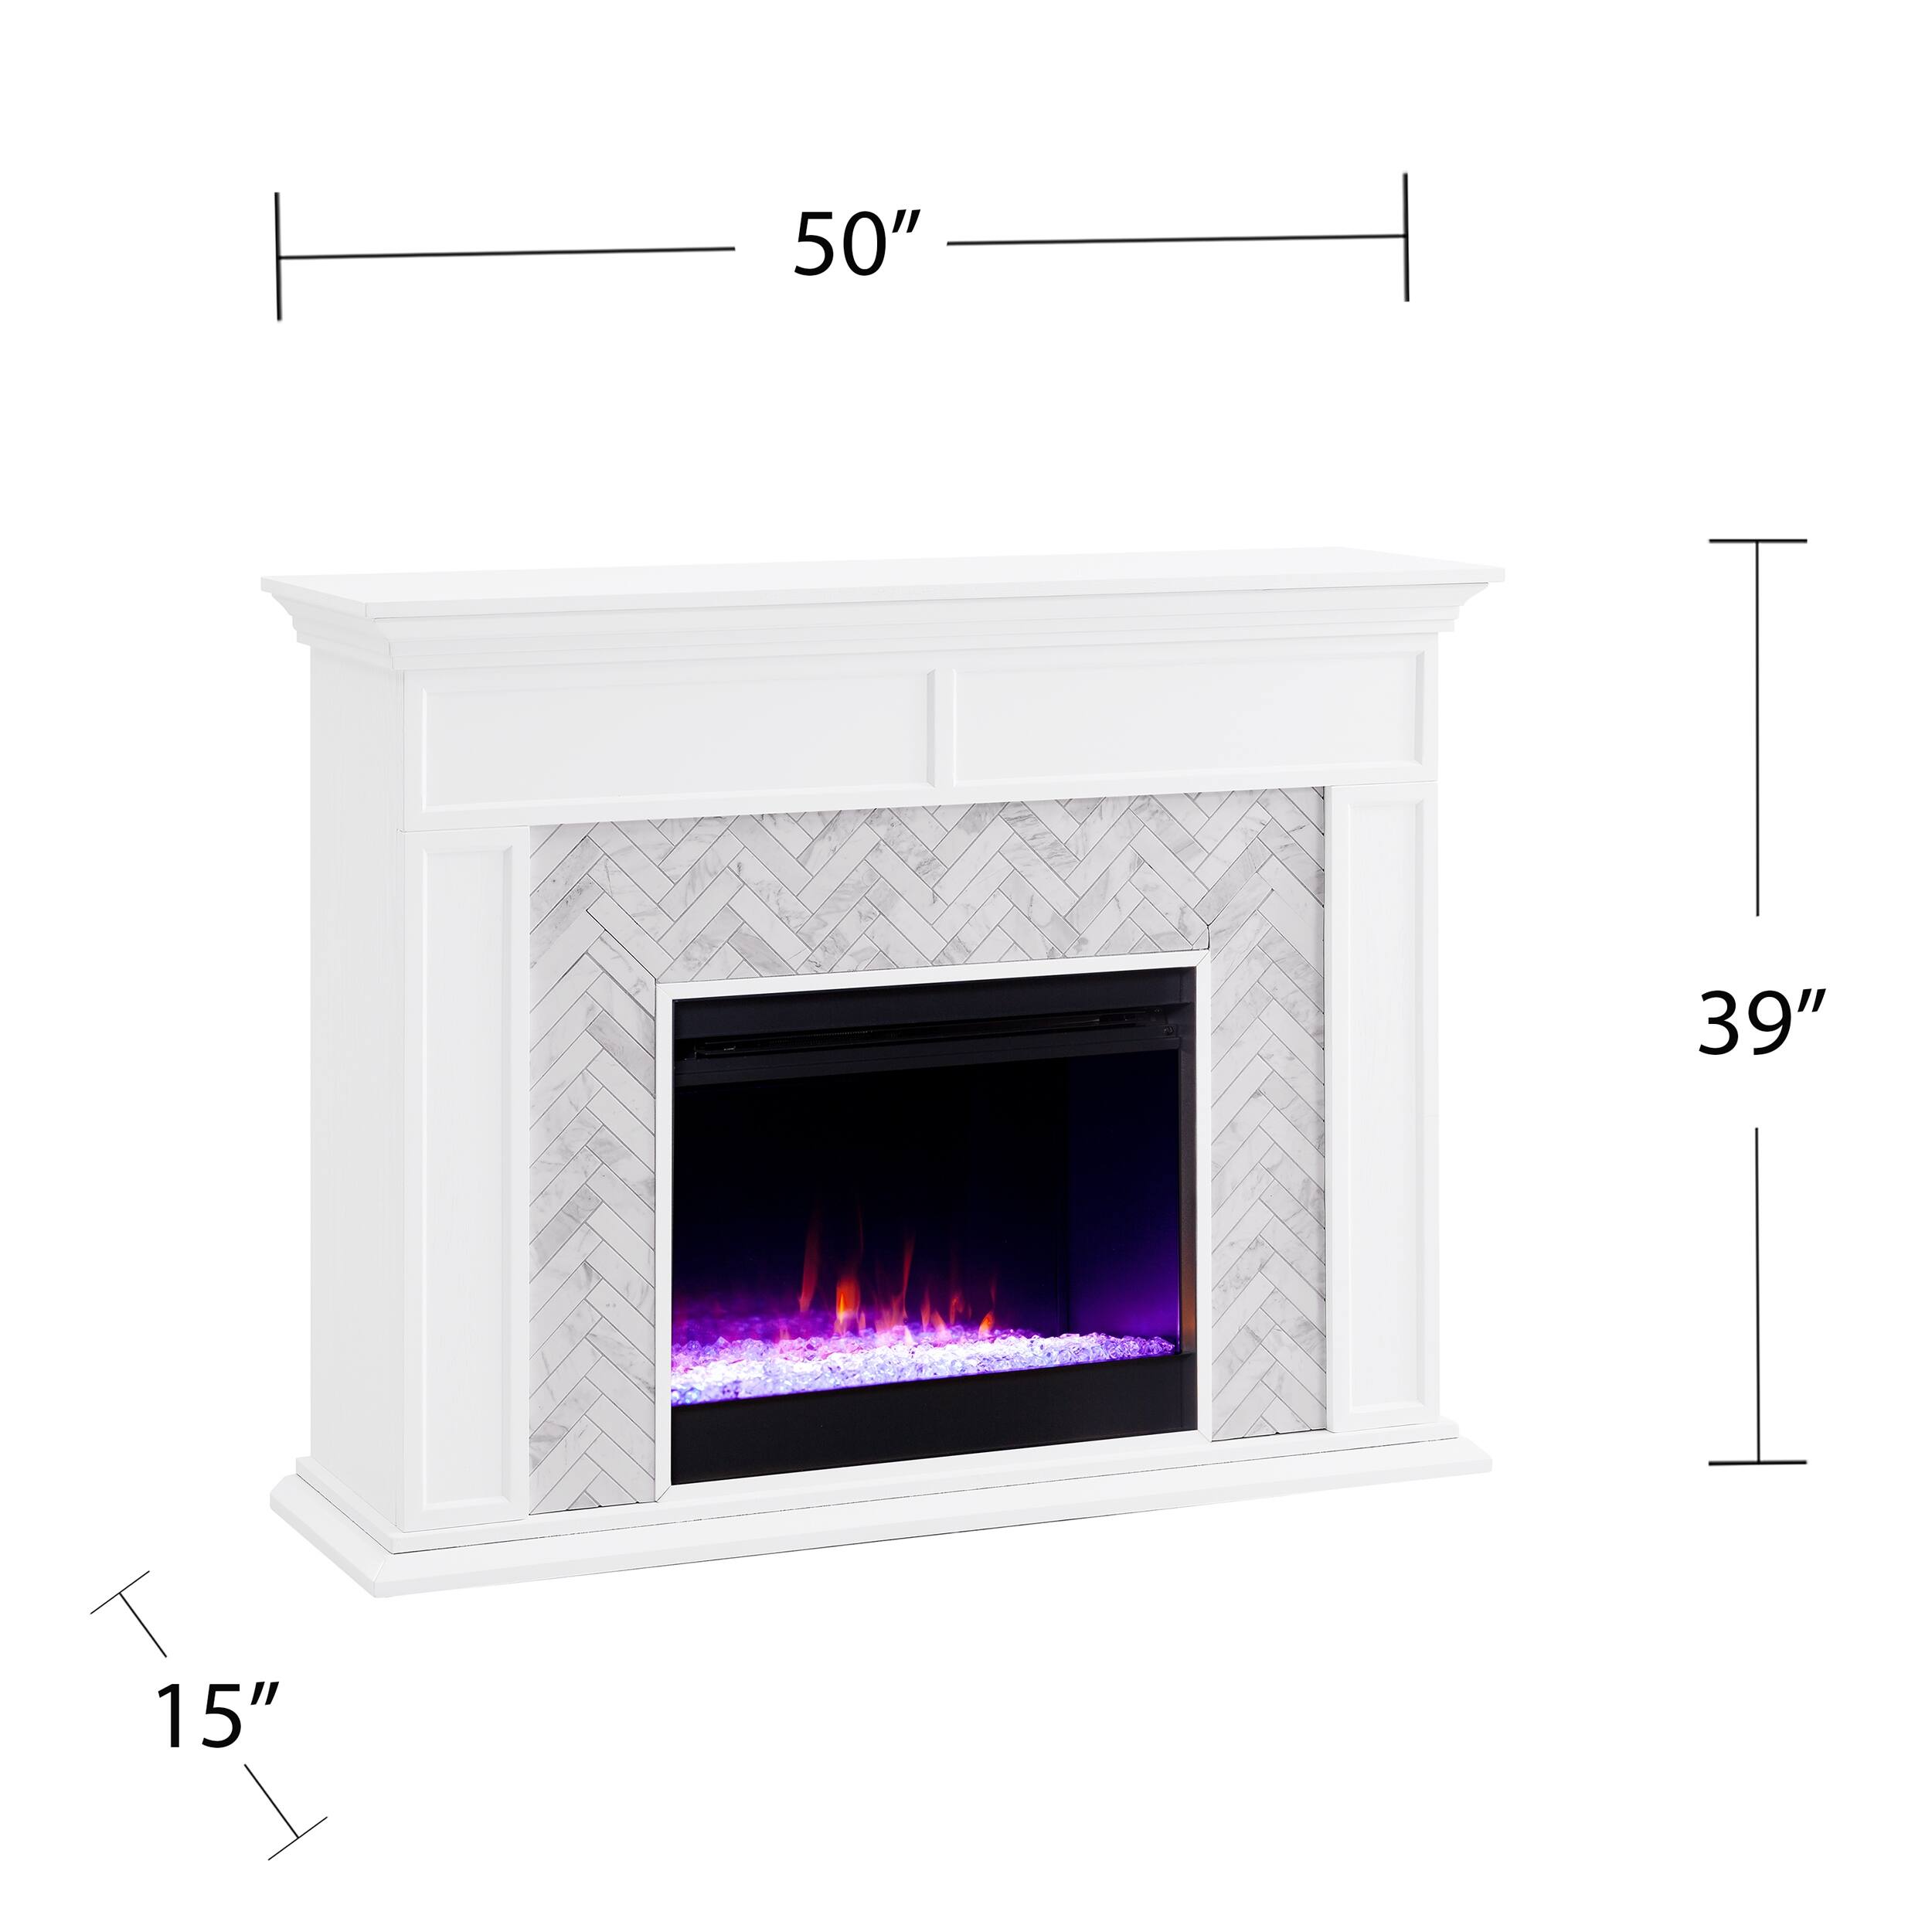 SEI Furniture Torton Contemporary Color Changing Electric Fireplace with Marble Tiled Mantel - Black